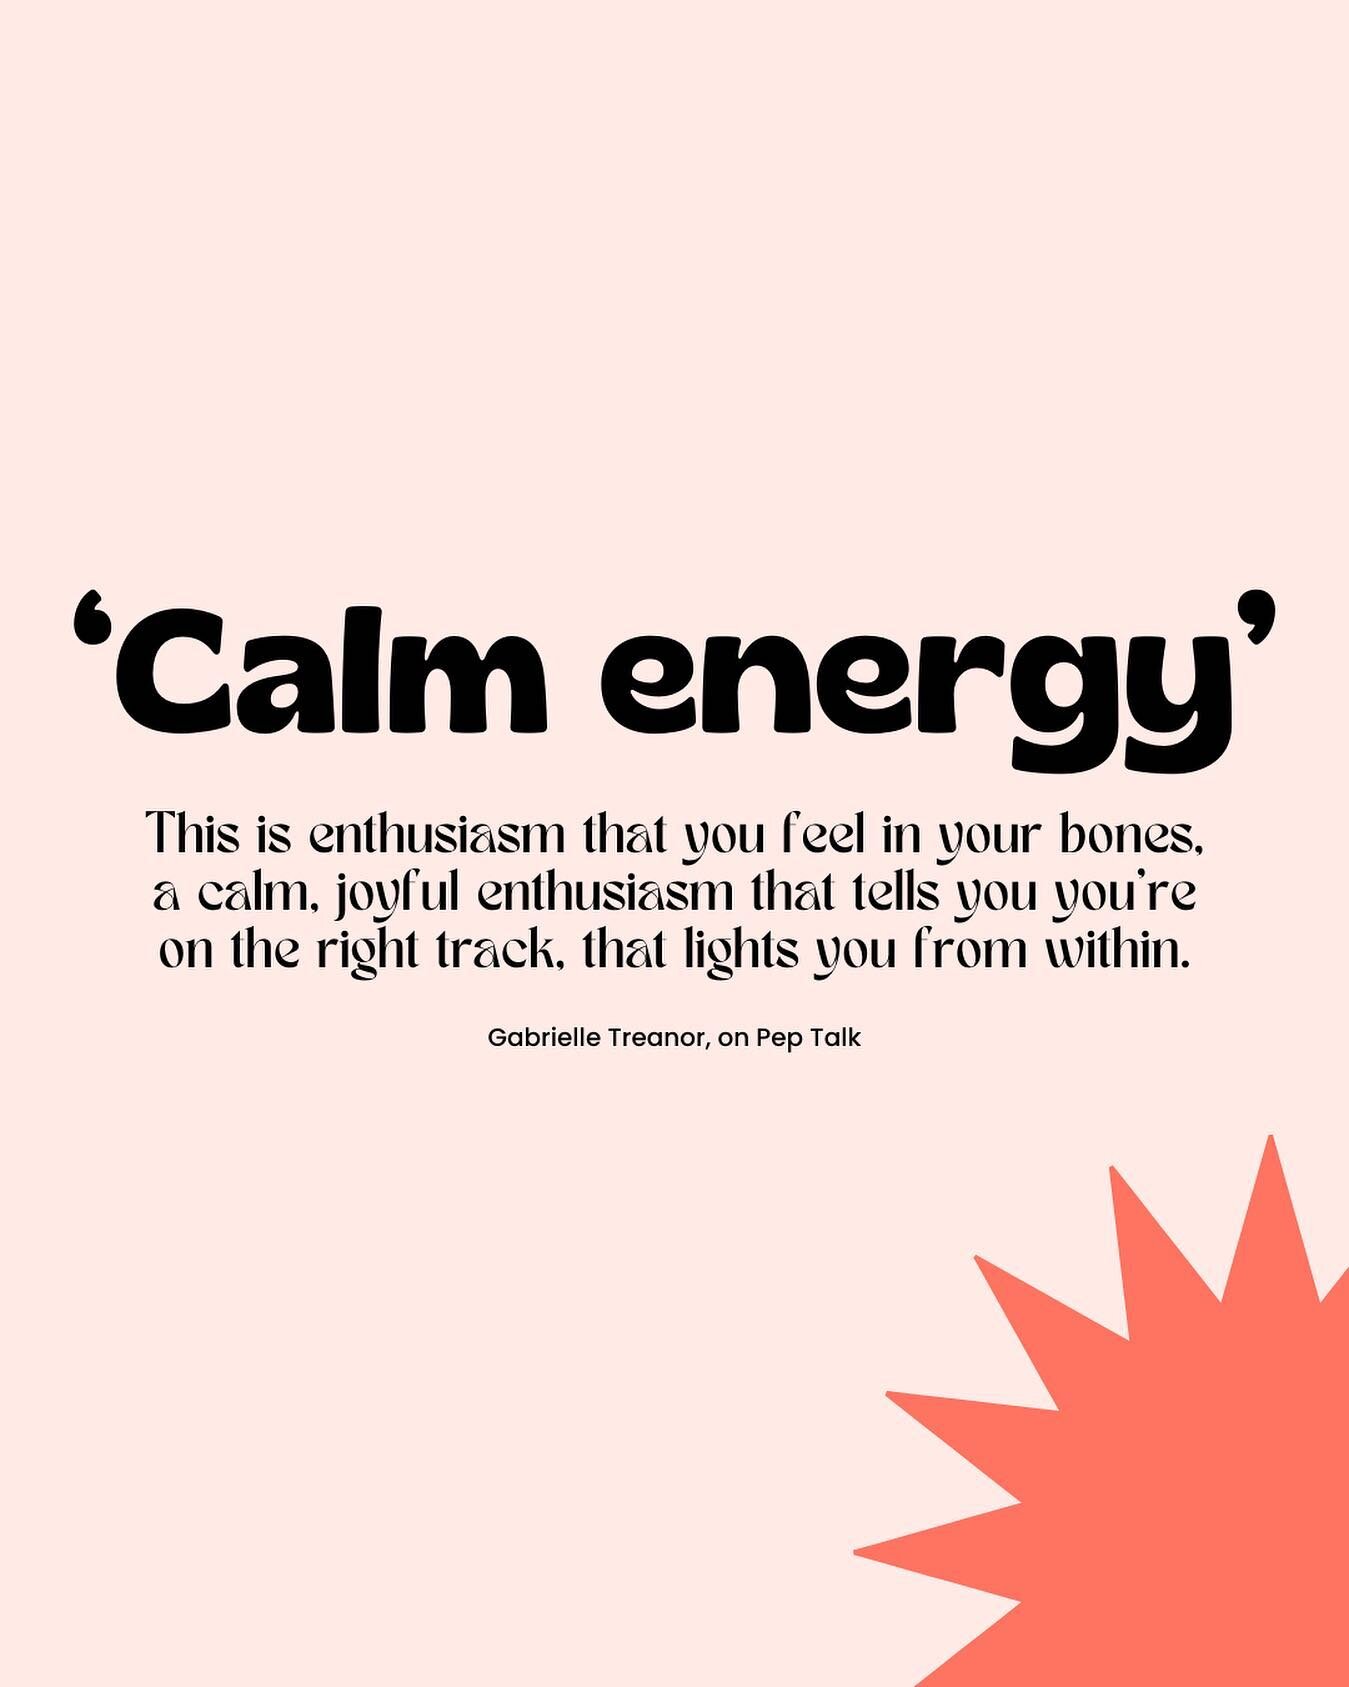 Yesterday the wonderful @gabrielletreanor and I did a @substackinc swap &mdash; I wrote for the Haven about enthusiasm and overwhelm, and she wrote for Pep Talk about how enthusiasm and calm go together. In it, she talks about &ldquo;calm energy&rdqu